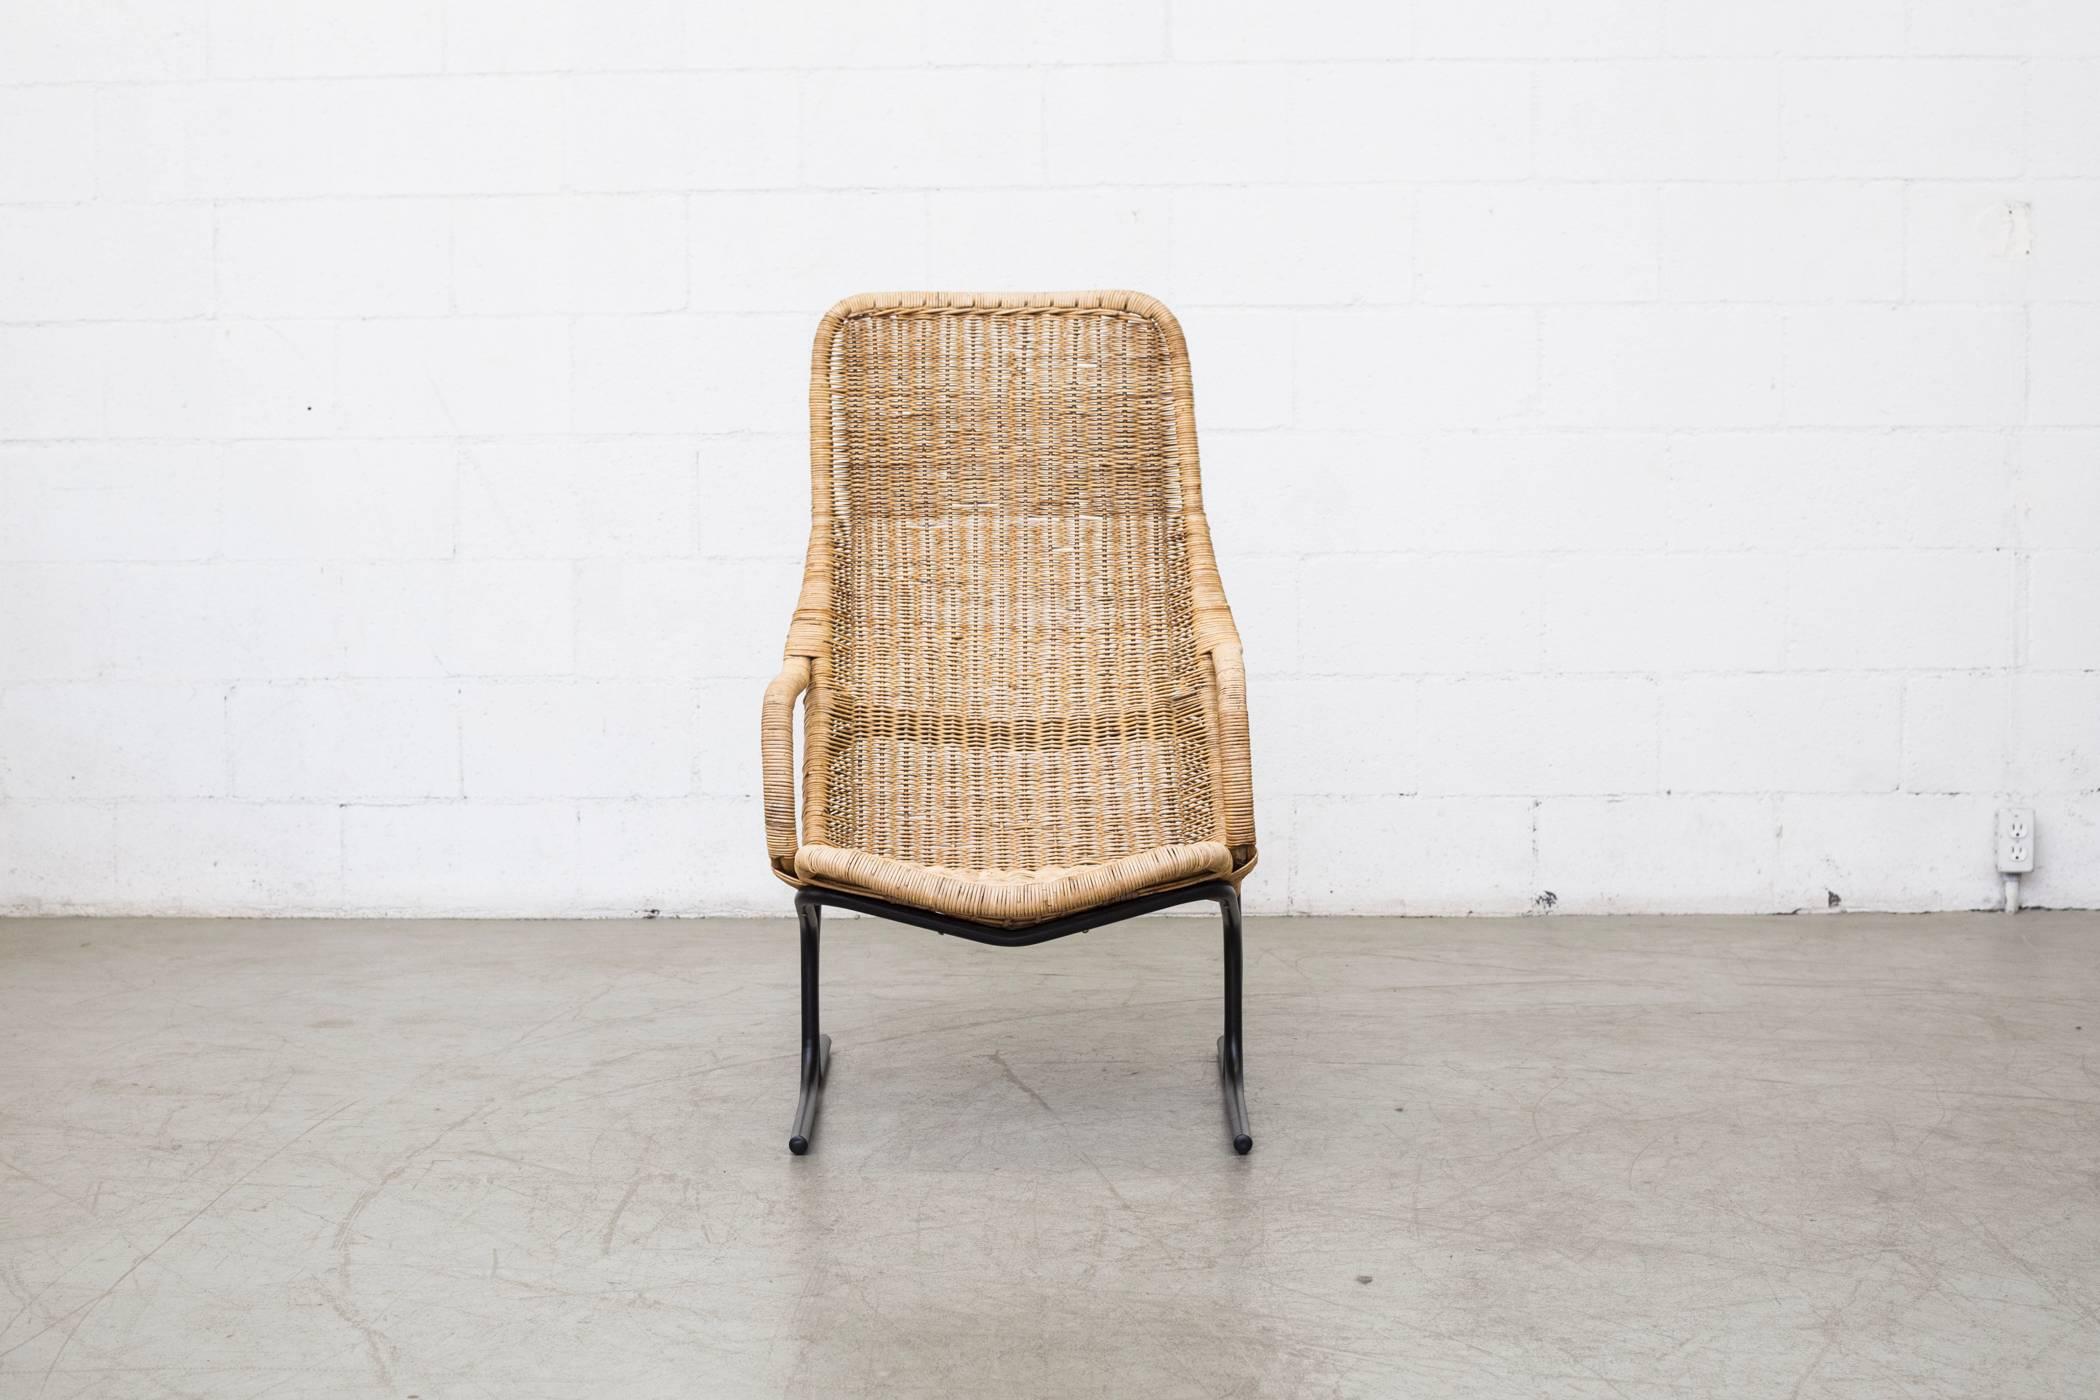 High back woven rattan lounge chair with black enameled metal tubular frame in original condition. Visible signs of wear, minimal rattan loss. Beautiful chair!